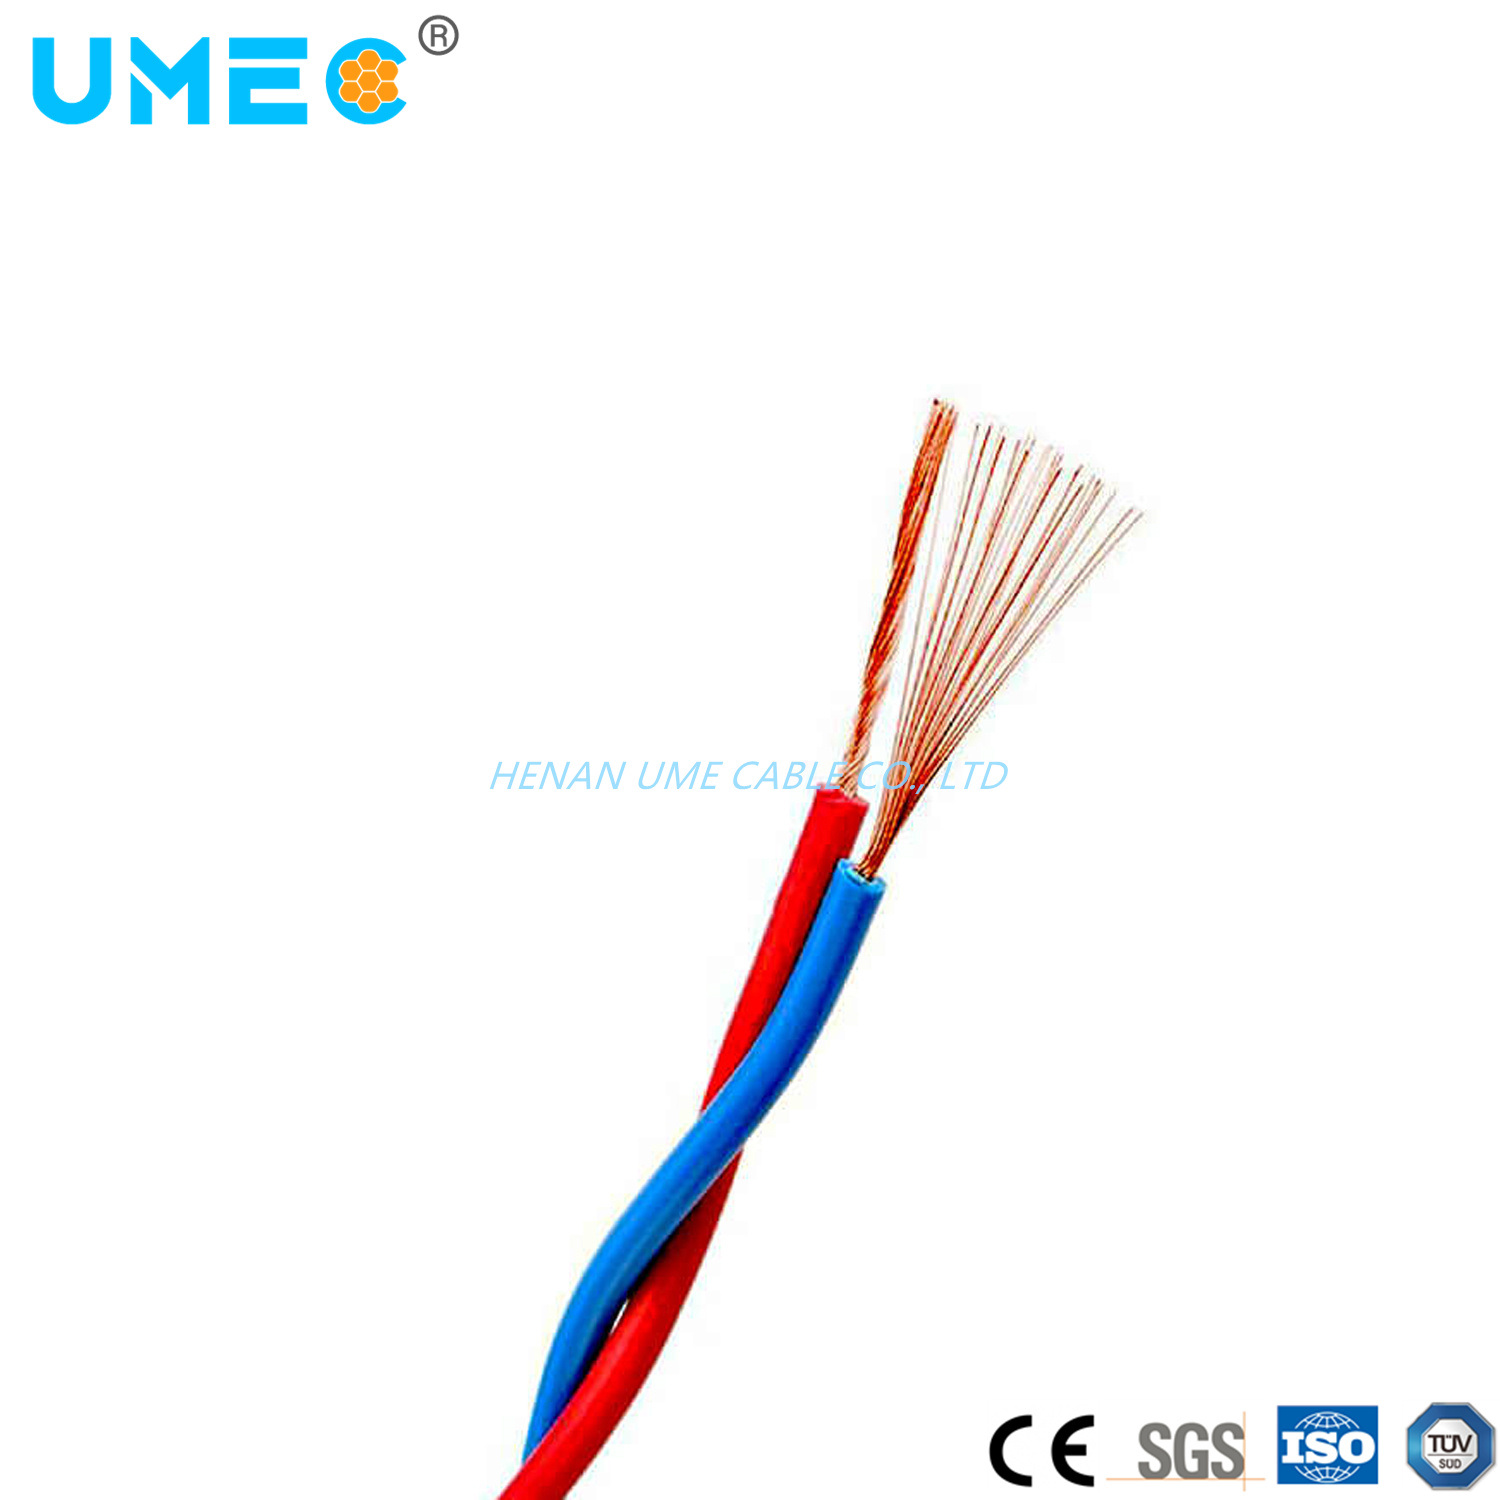 New Fire Resistance Rvs Flower Wire Flame Retardant PVC Oxygen-Free Copper 1.5mm 2.5mm 4mm 6mm Electric Cable